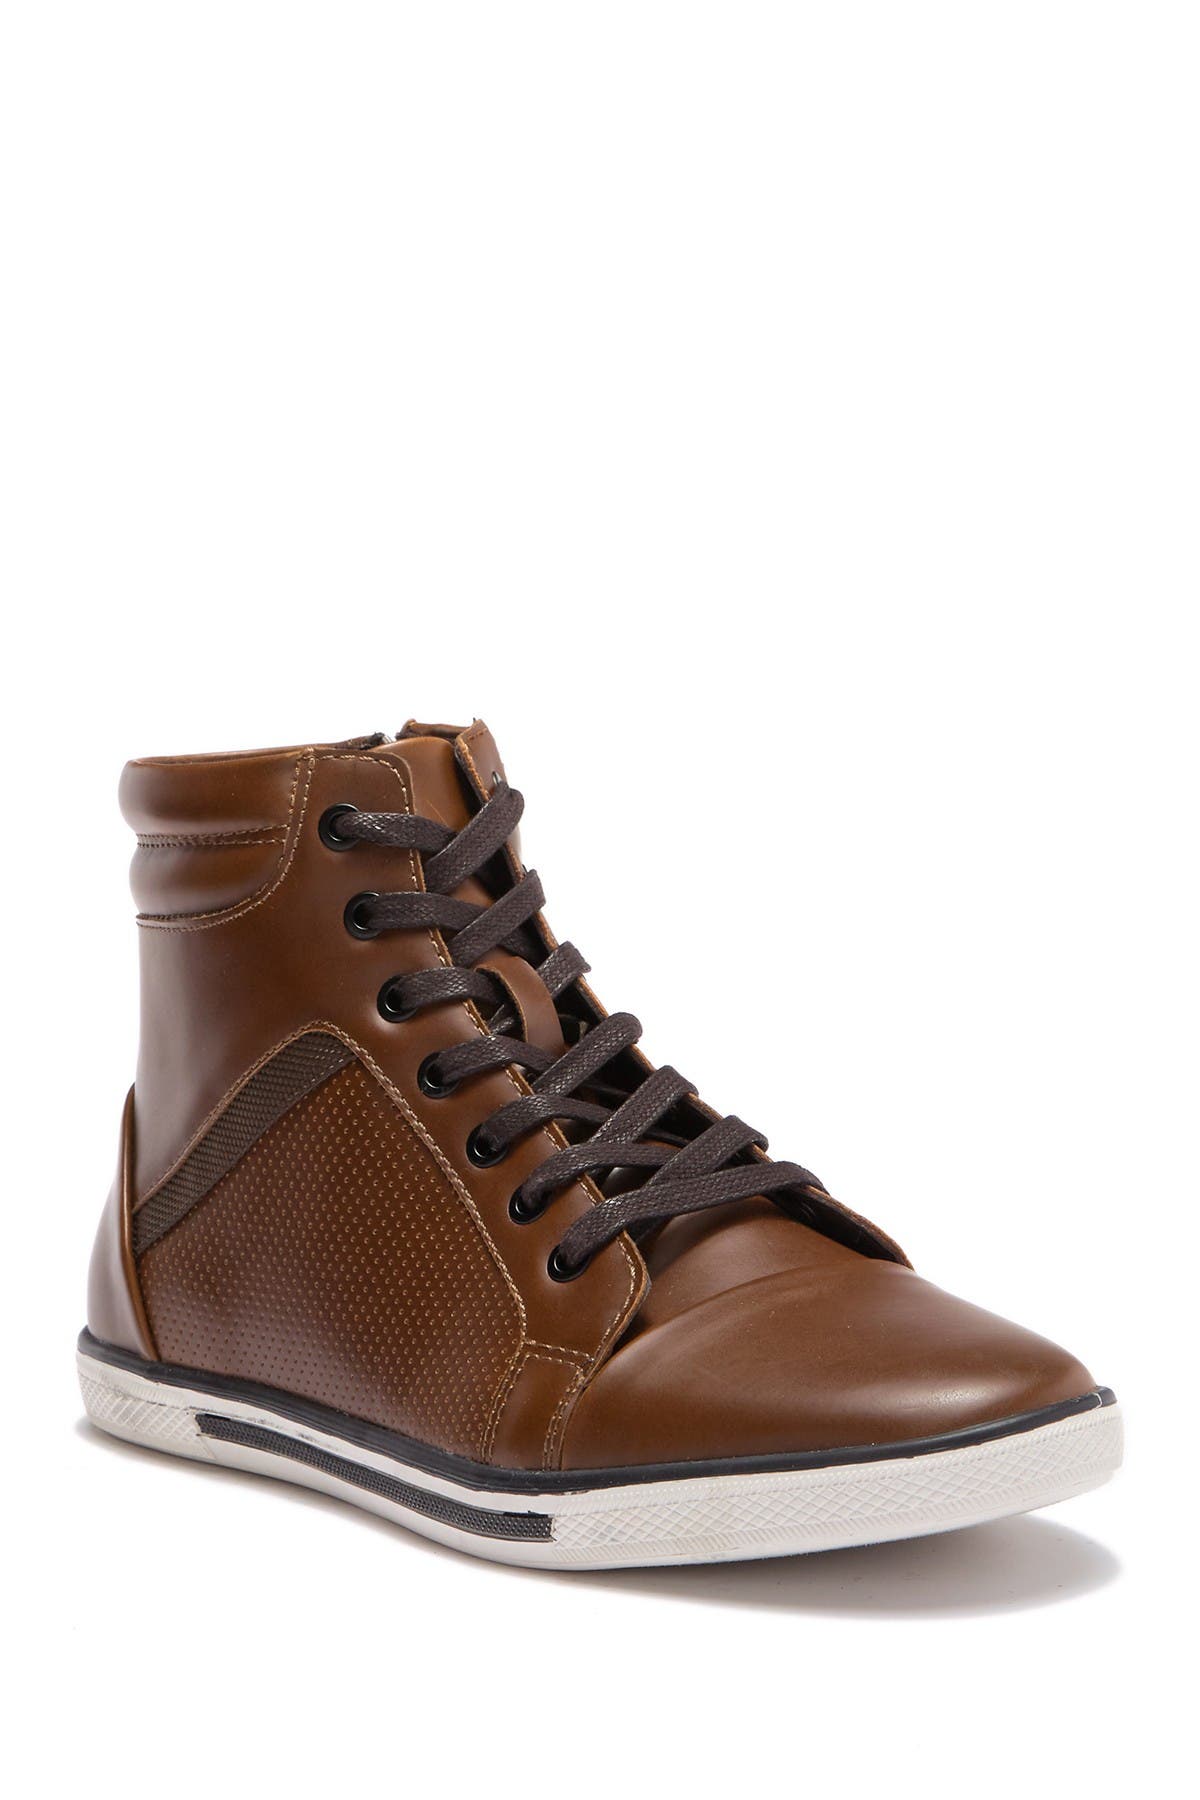 kenneth cole all crown up sneaker